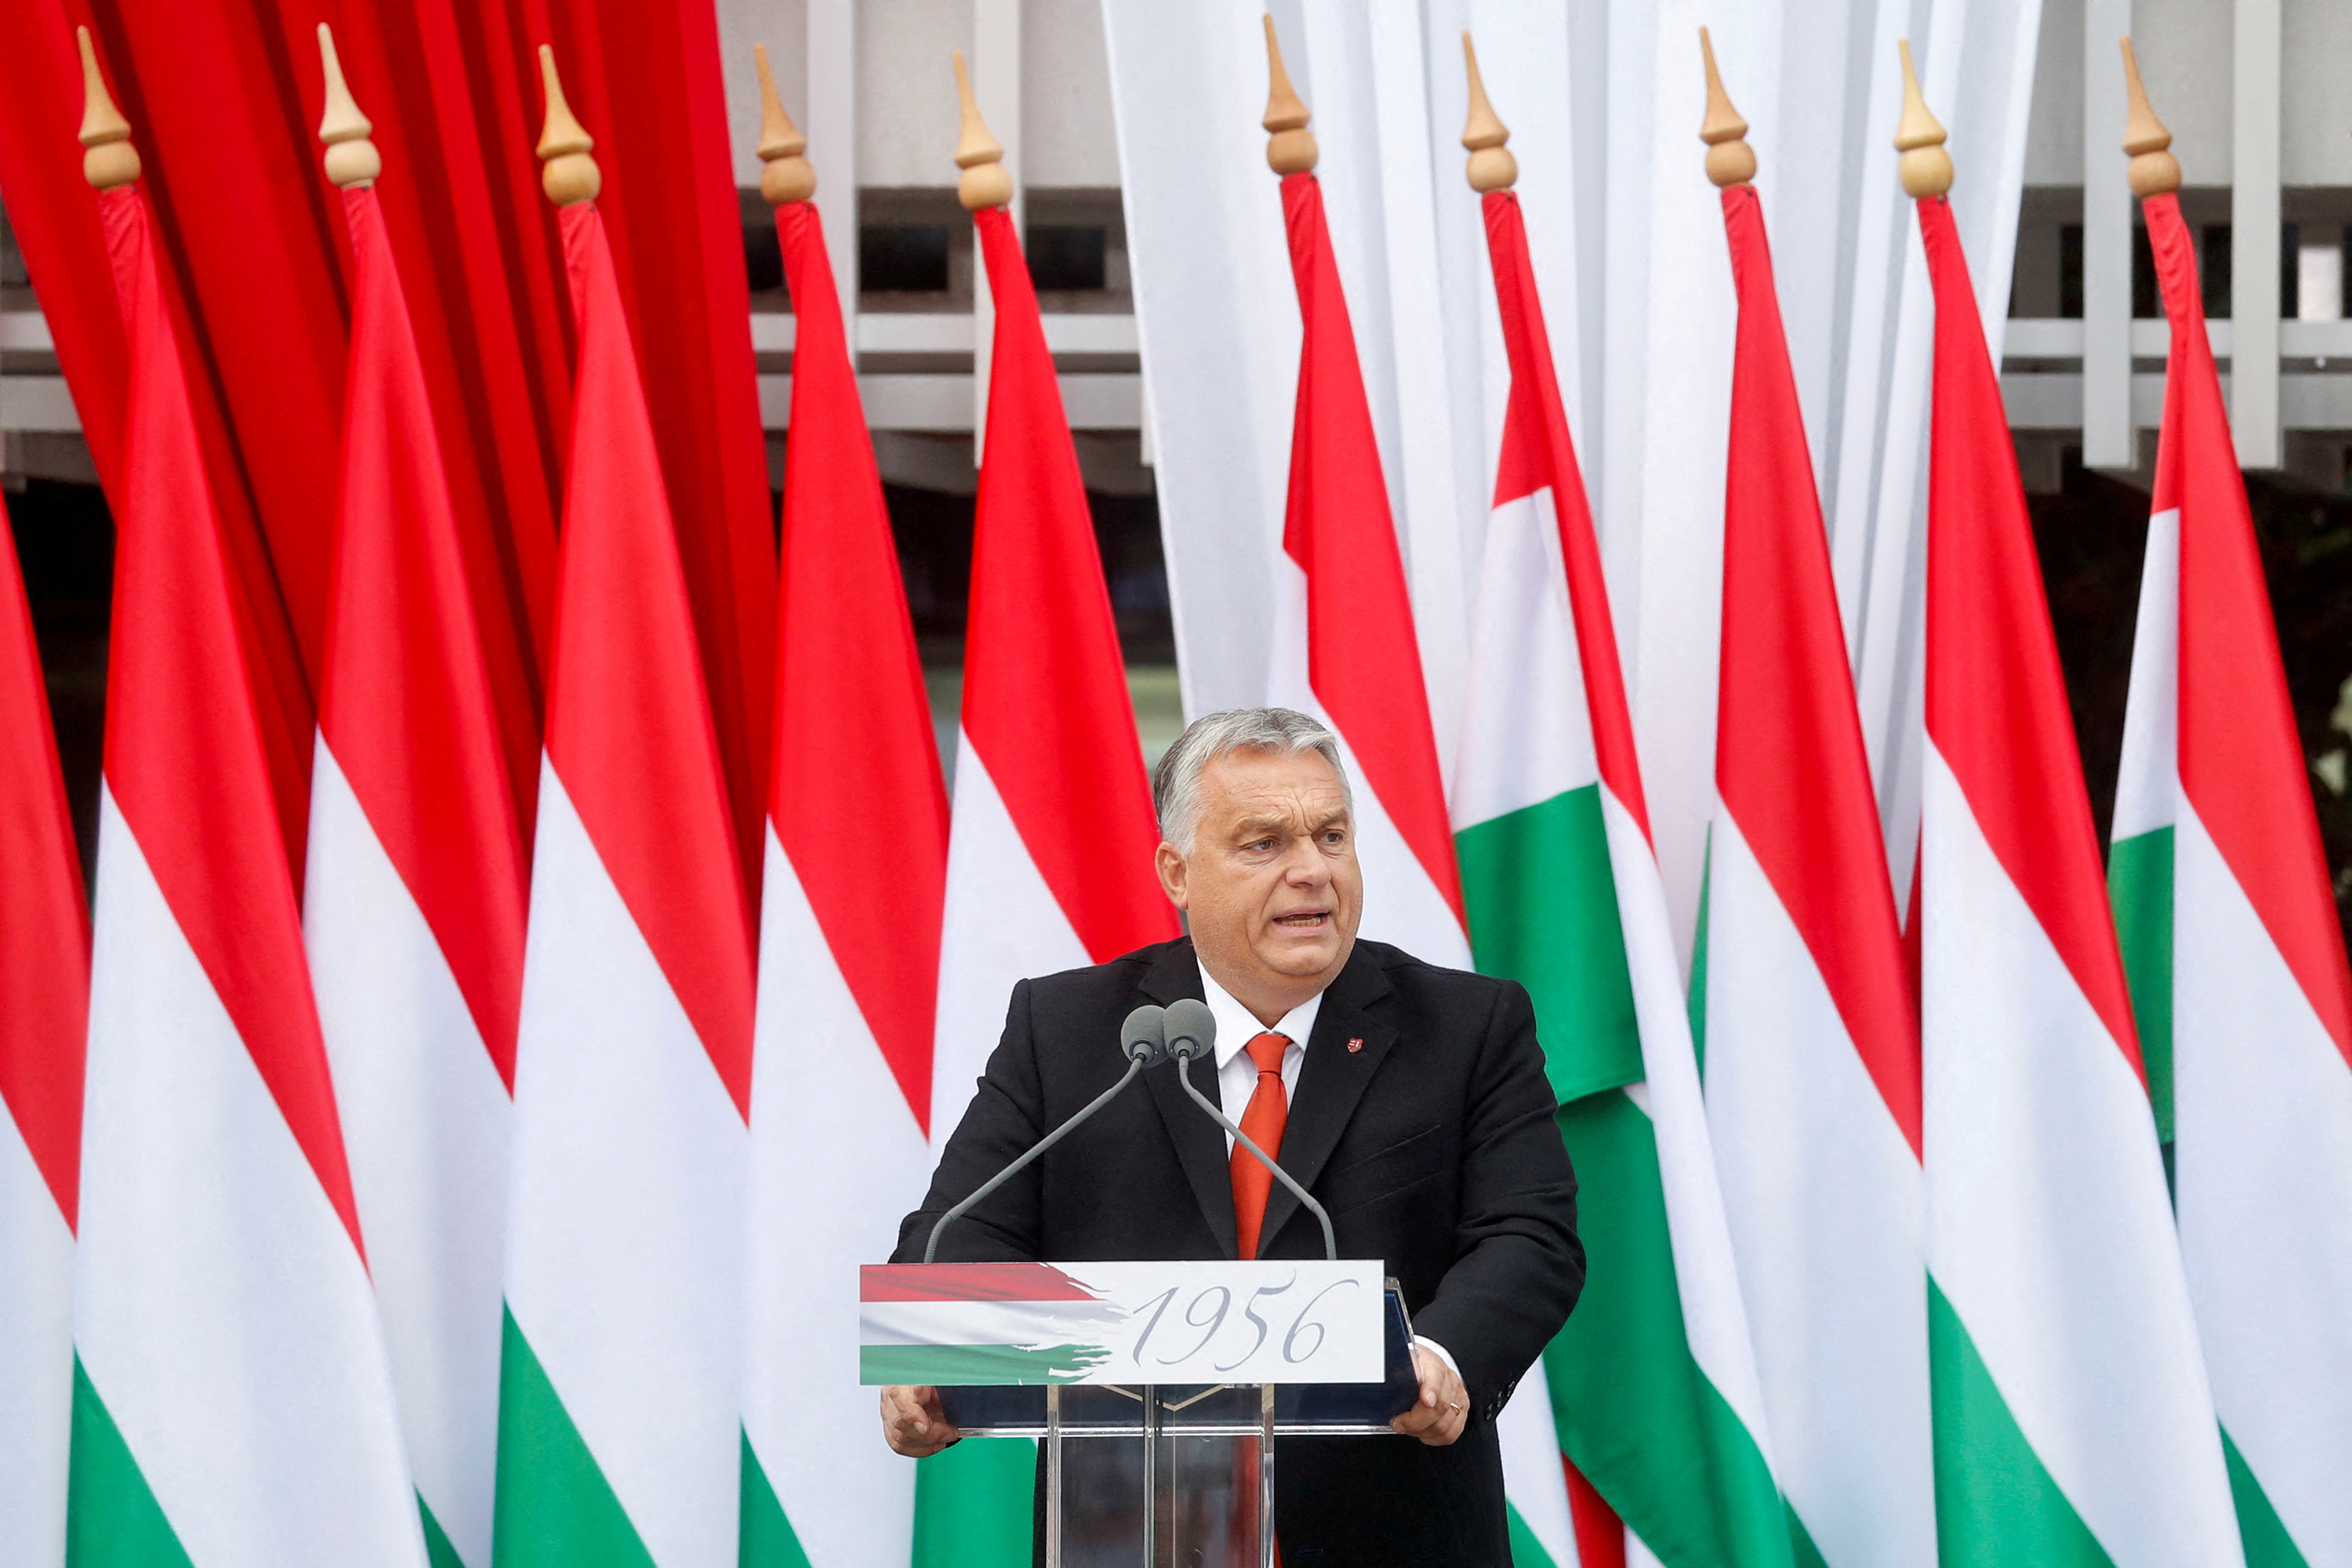 Hungarian Prime Minister Viktor Orban delivers a speech on October 23, in Zalaegerszeg, Hungary.